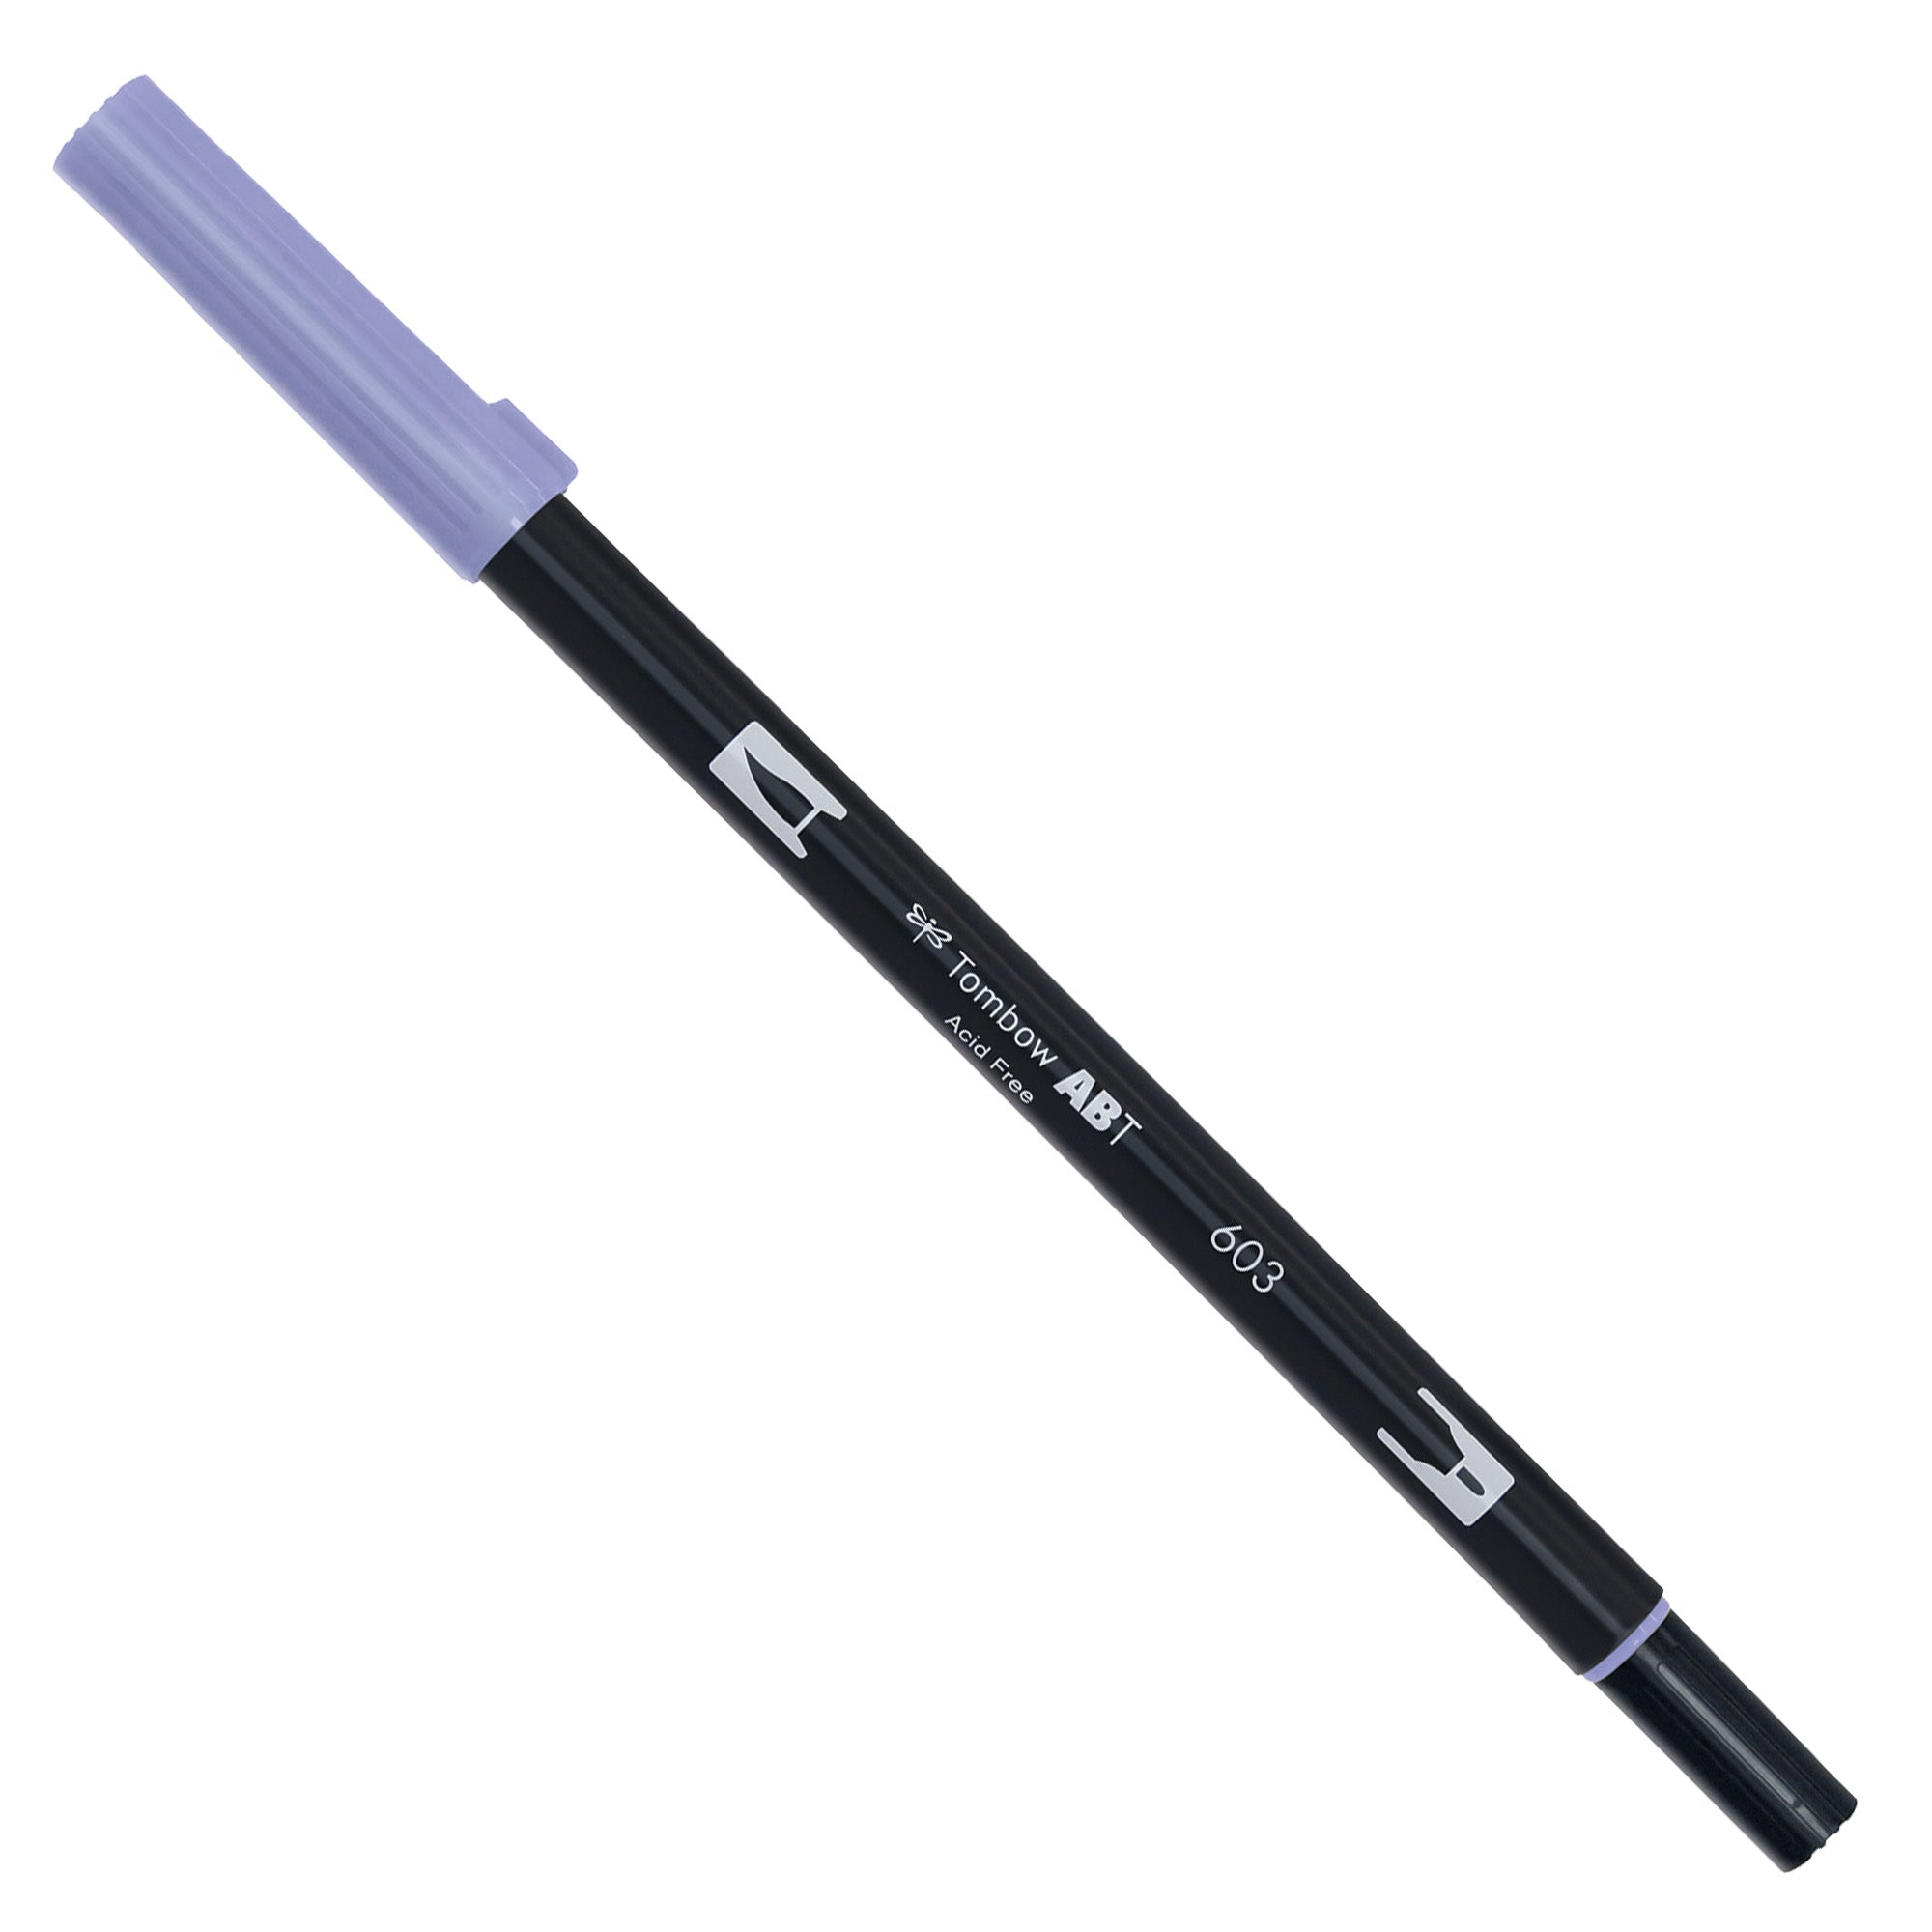 tombow-pennarello-abt-dual-brush-603-periwinkle